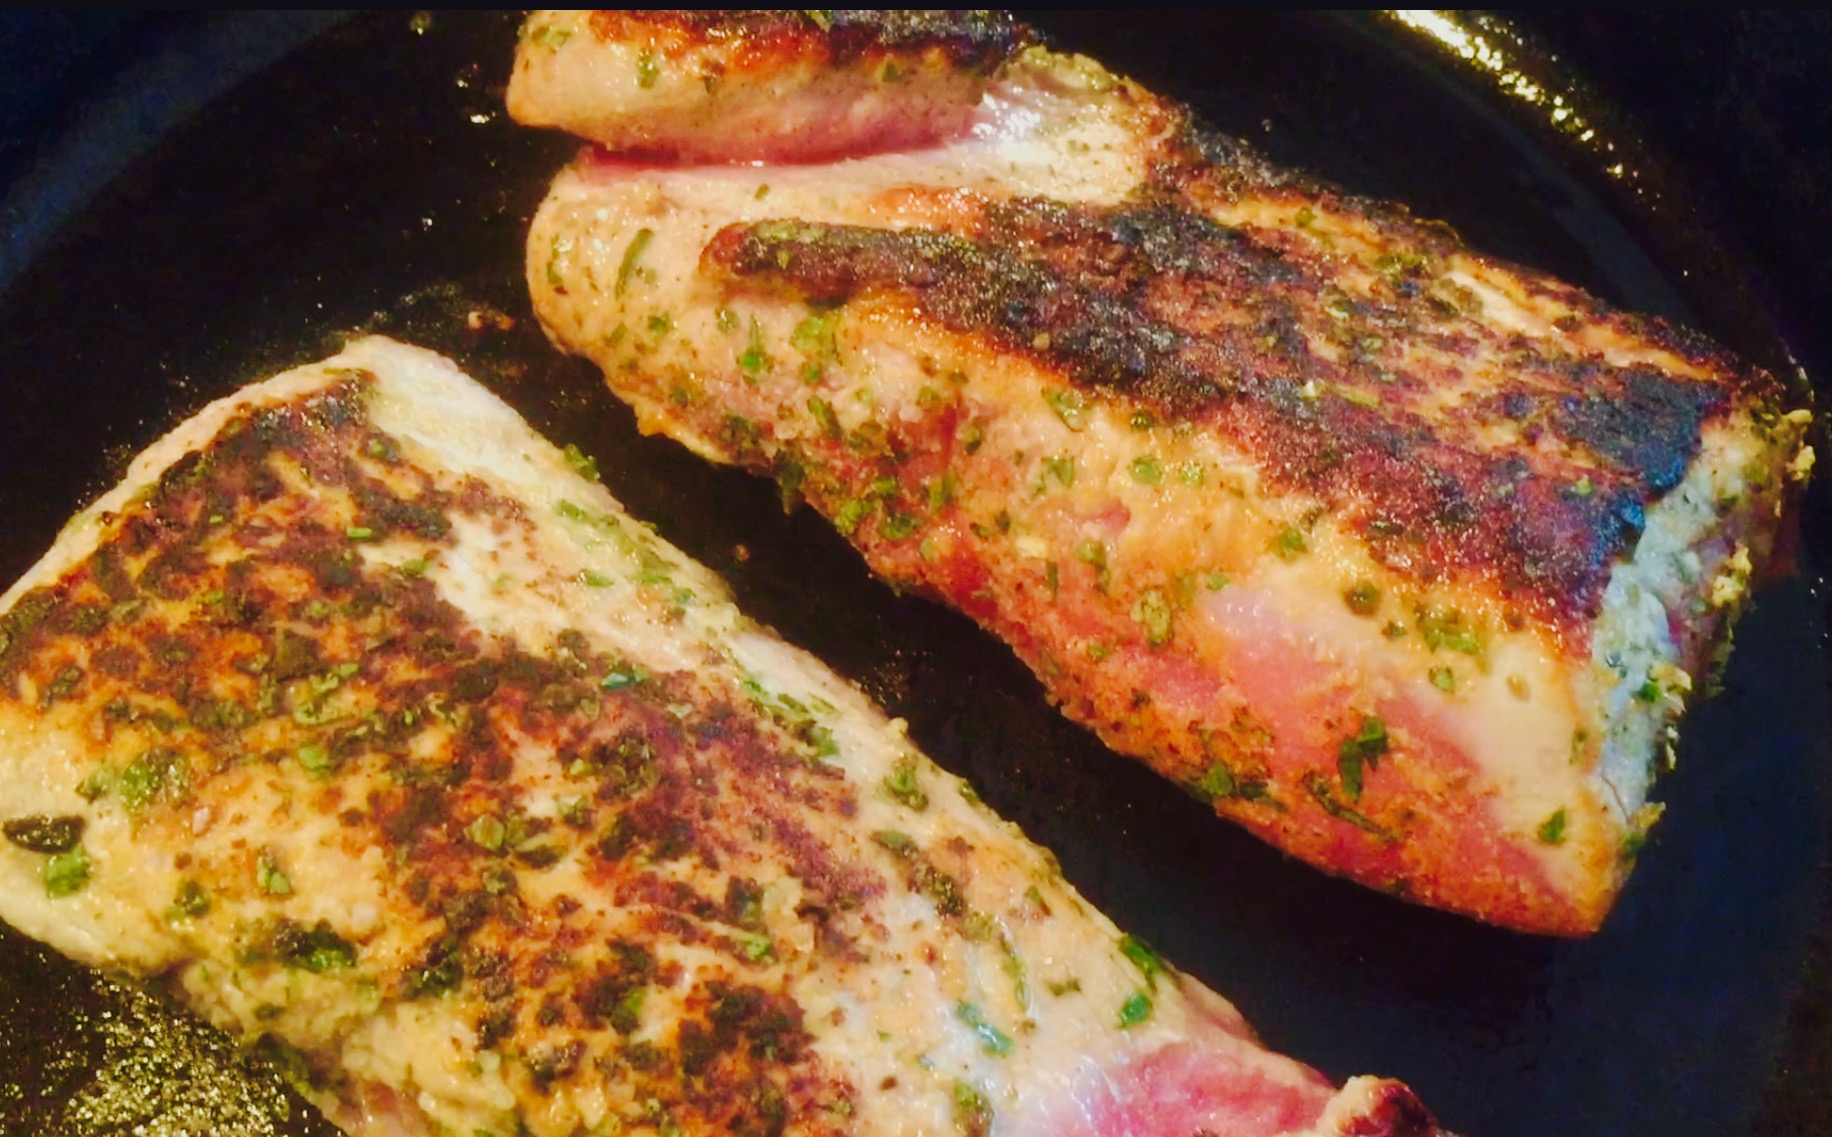 Pork tenderloin in a fresh herb rub, seered in a cast iron skillet and ready for the oven